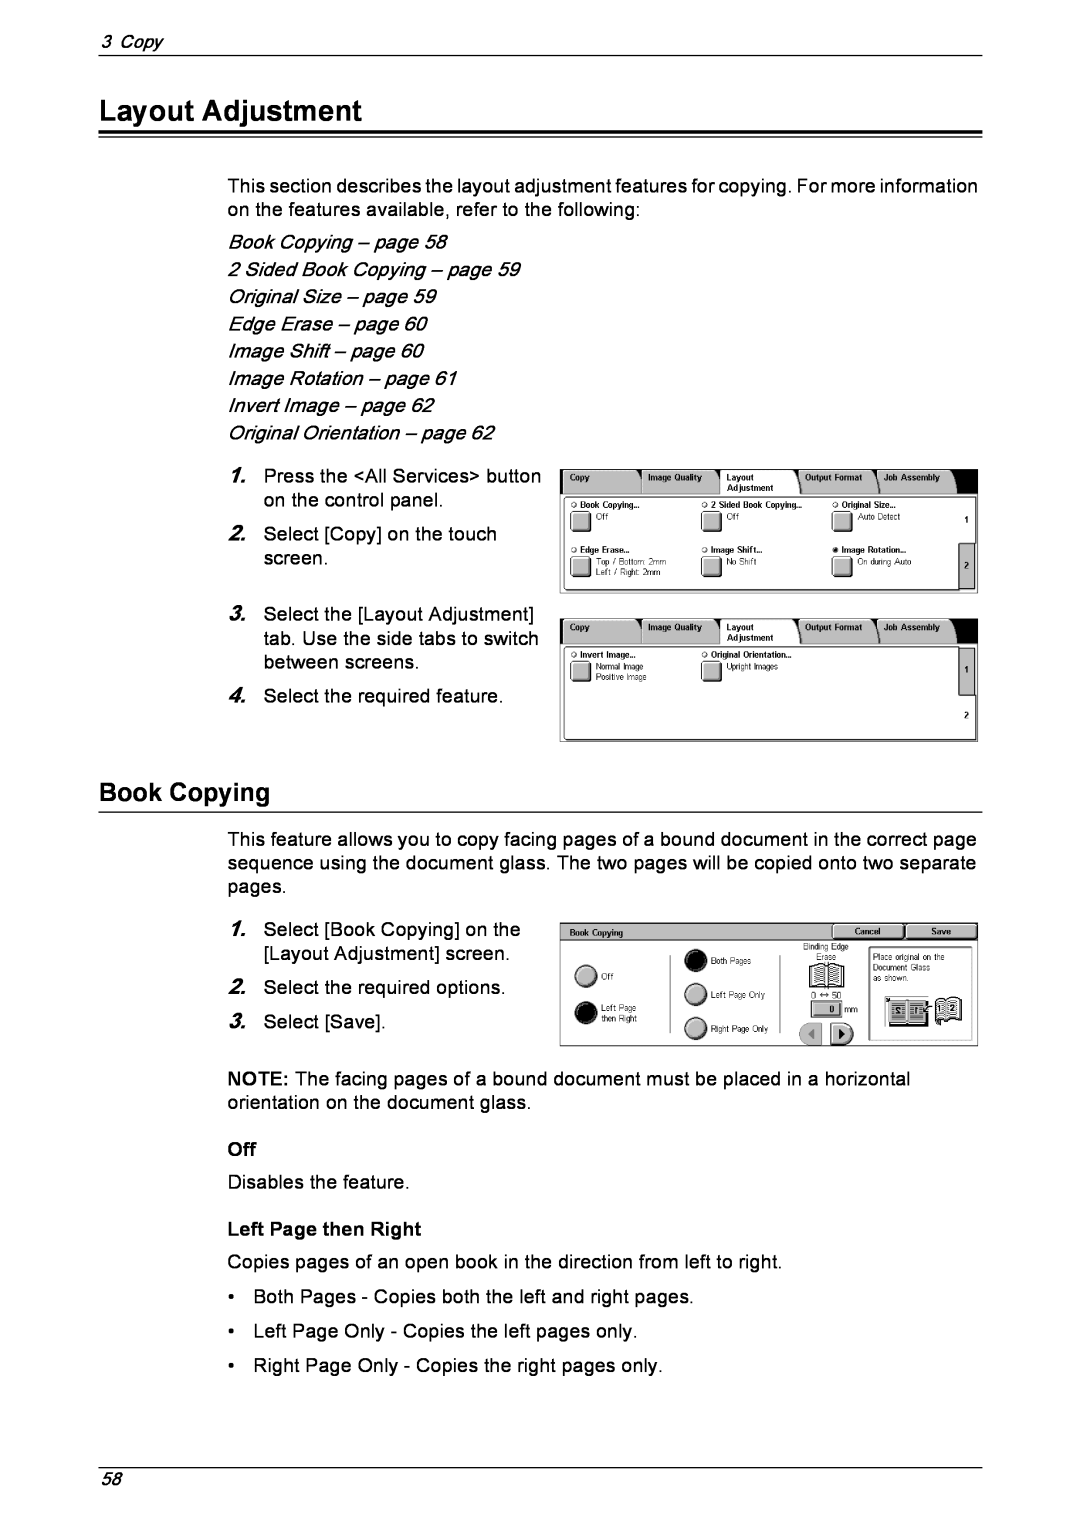 Xerox 5230 manual Layout Adjustment, Book Copying – page, Left Page then Right 